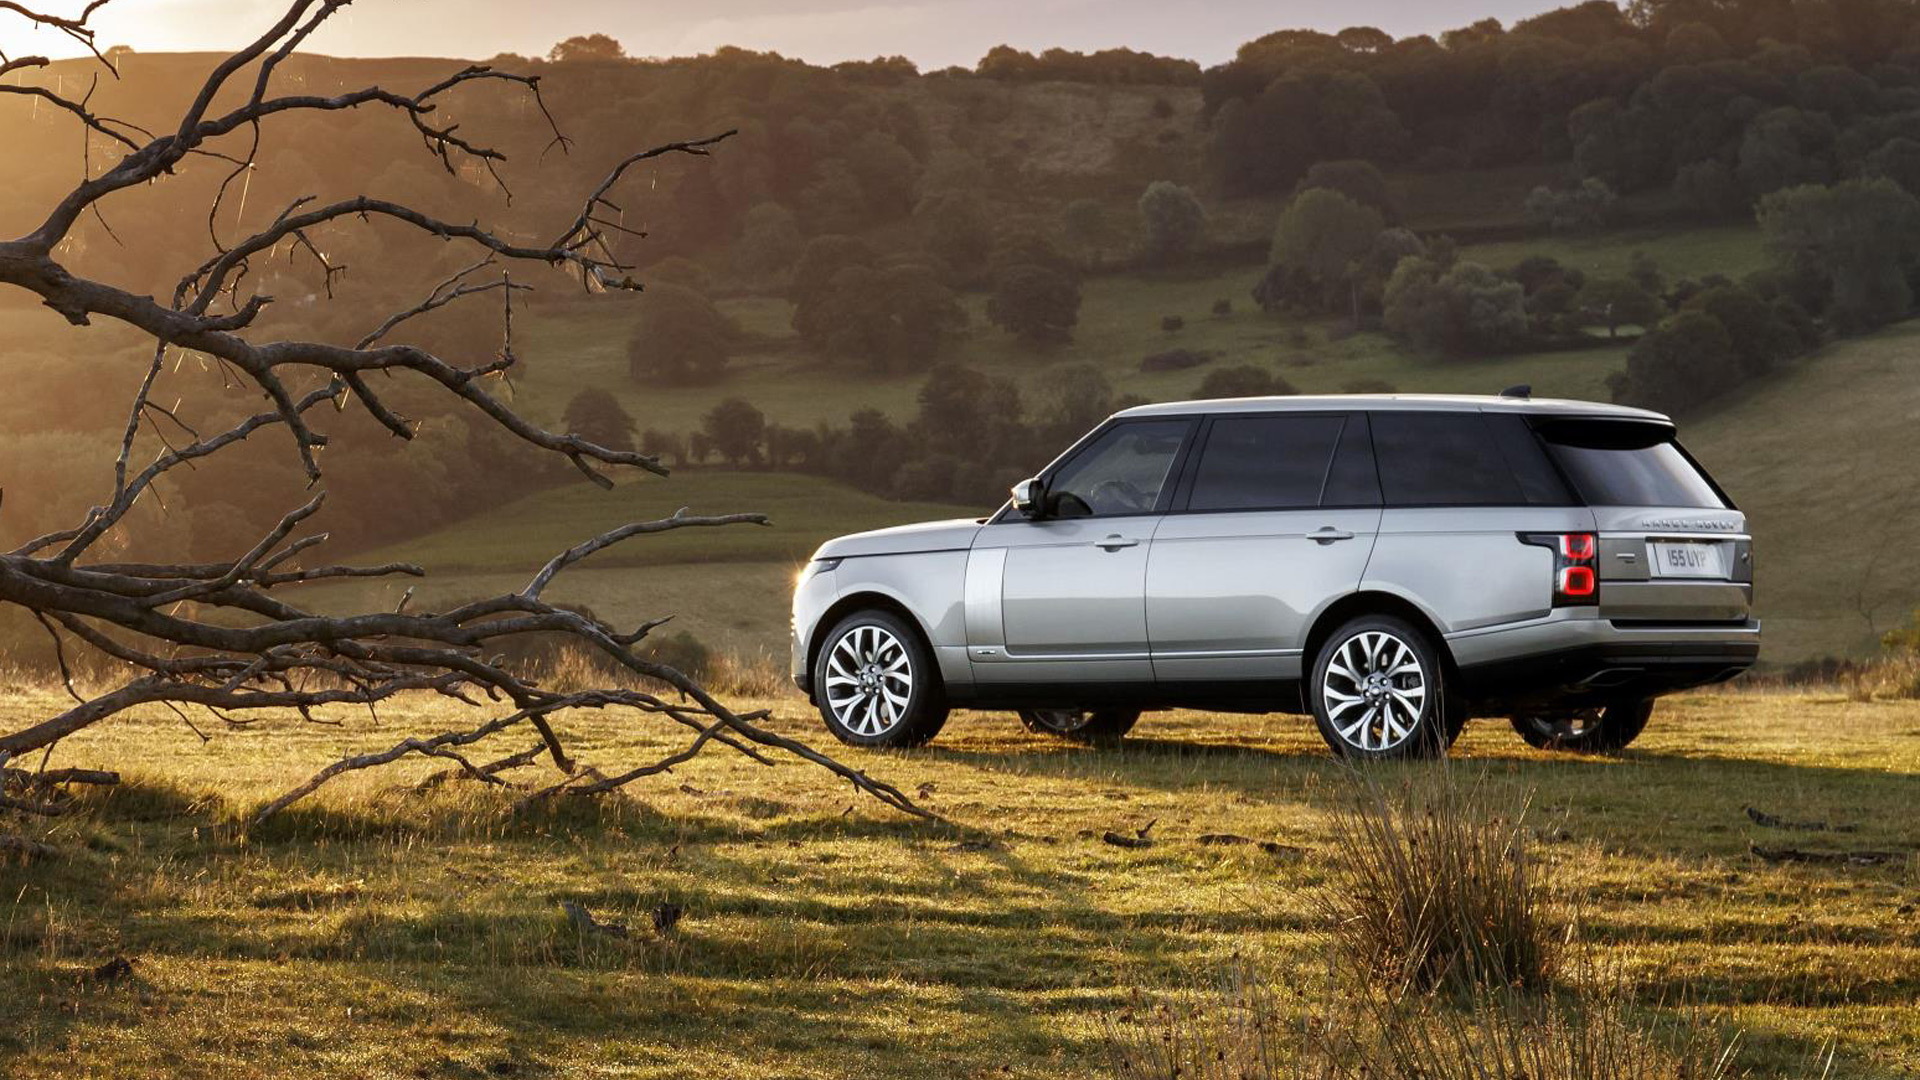 2019 Land Rover Range Rover P400e plug-in hybrid SUV: first drive review